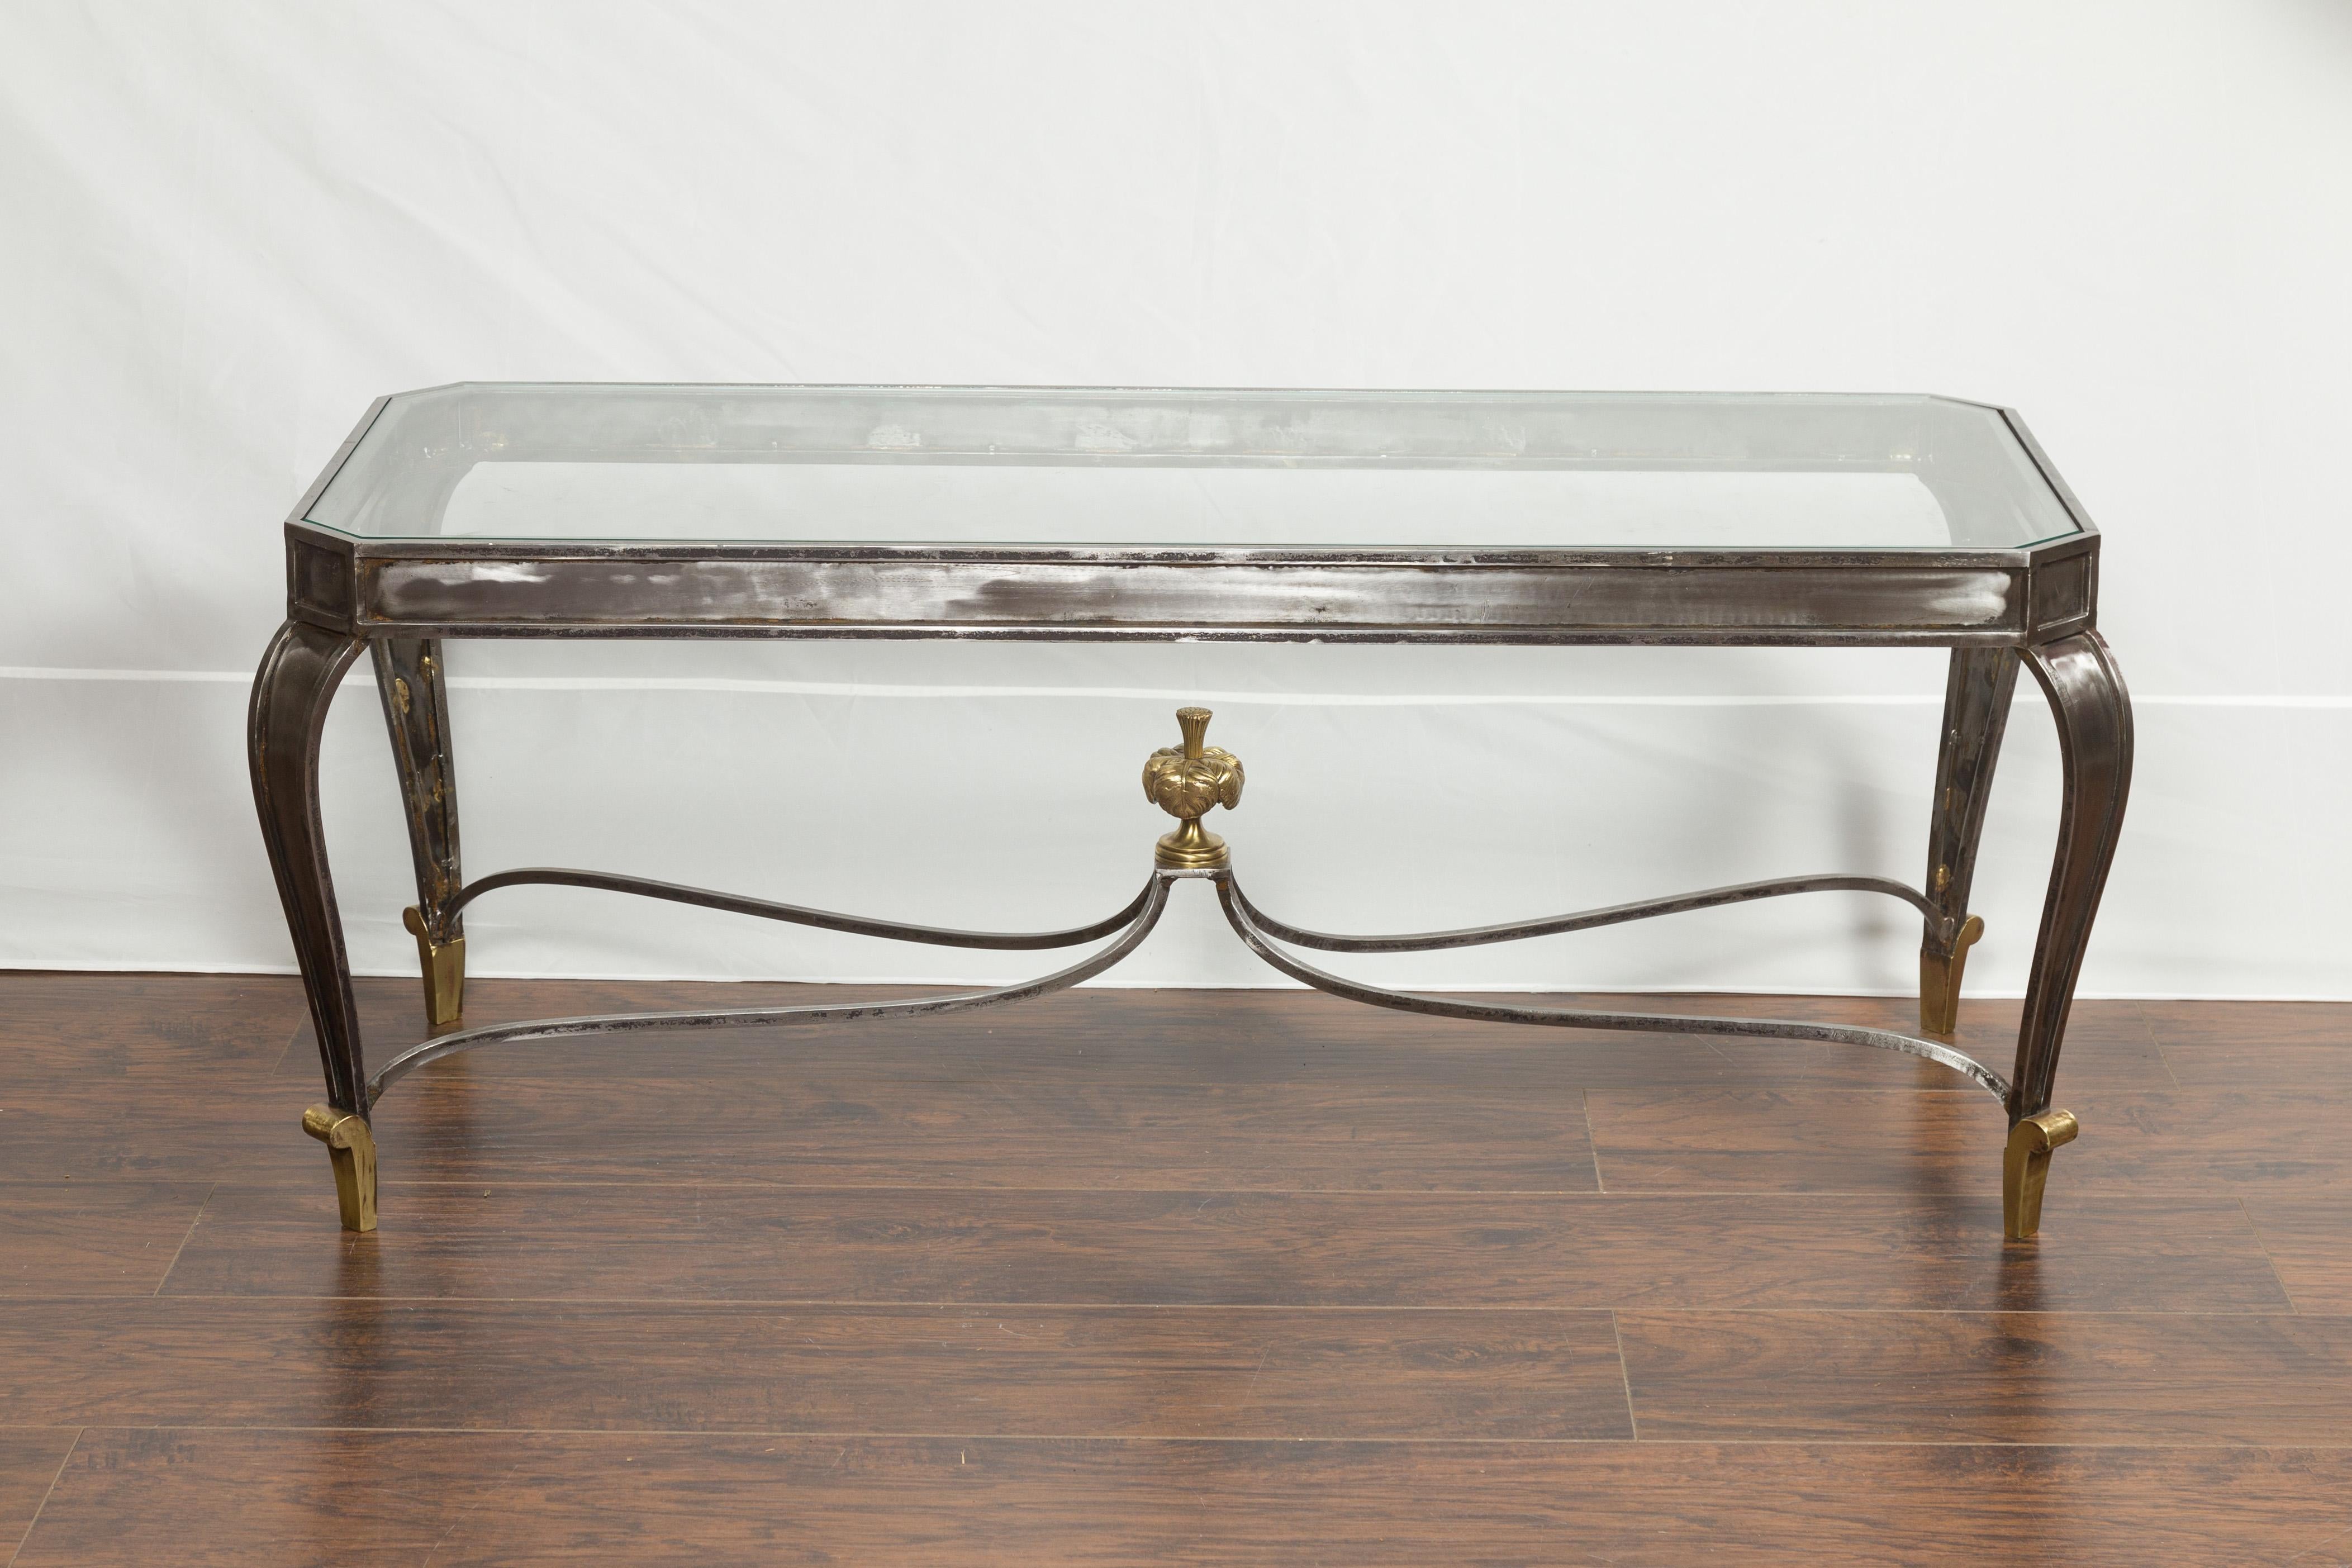 An Italian vintage steel and bronze coffee table from the mid-20th century, with glass top and feathery style finial. Created in Italy during the midcentury period, this coffee table features a rectangular glass top with canted corners, sitting